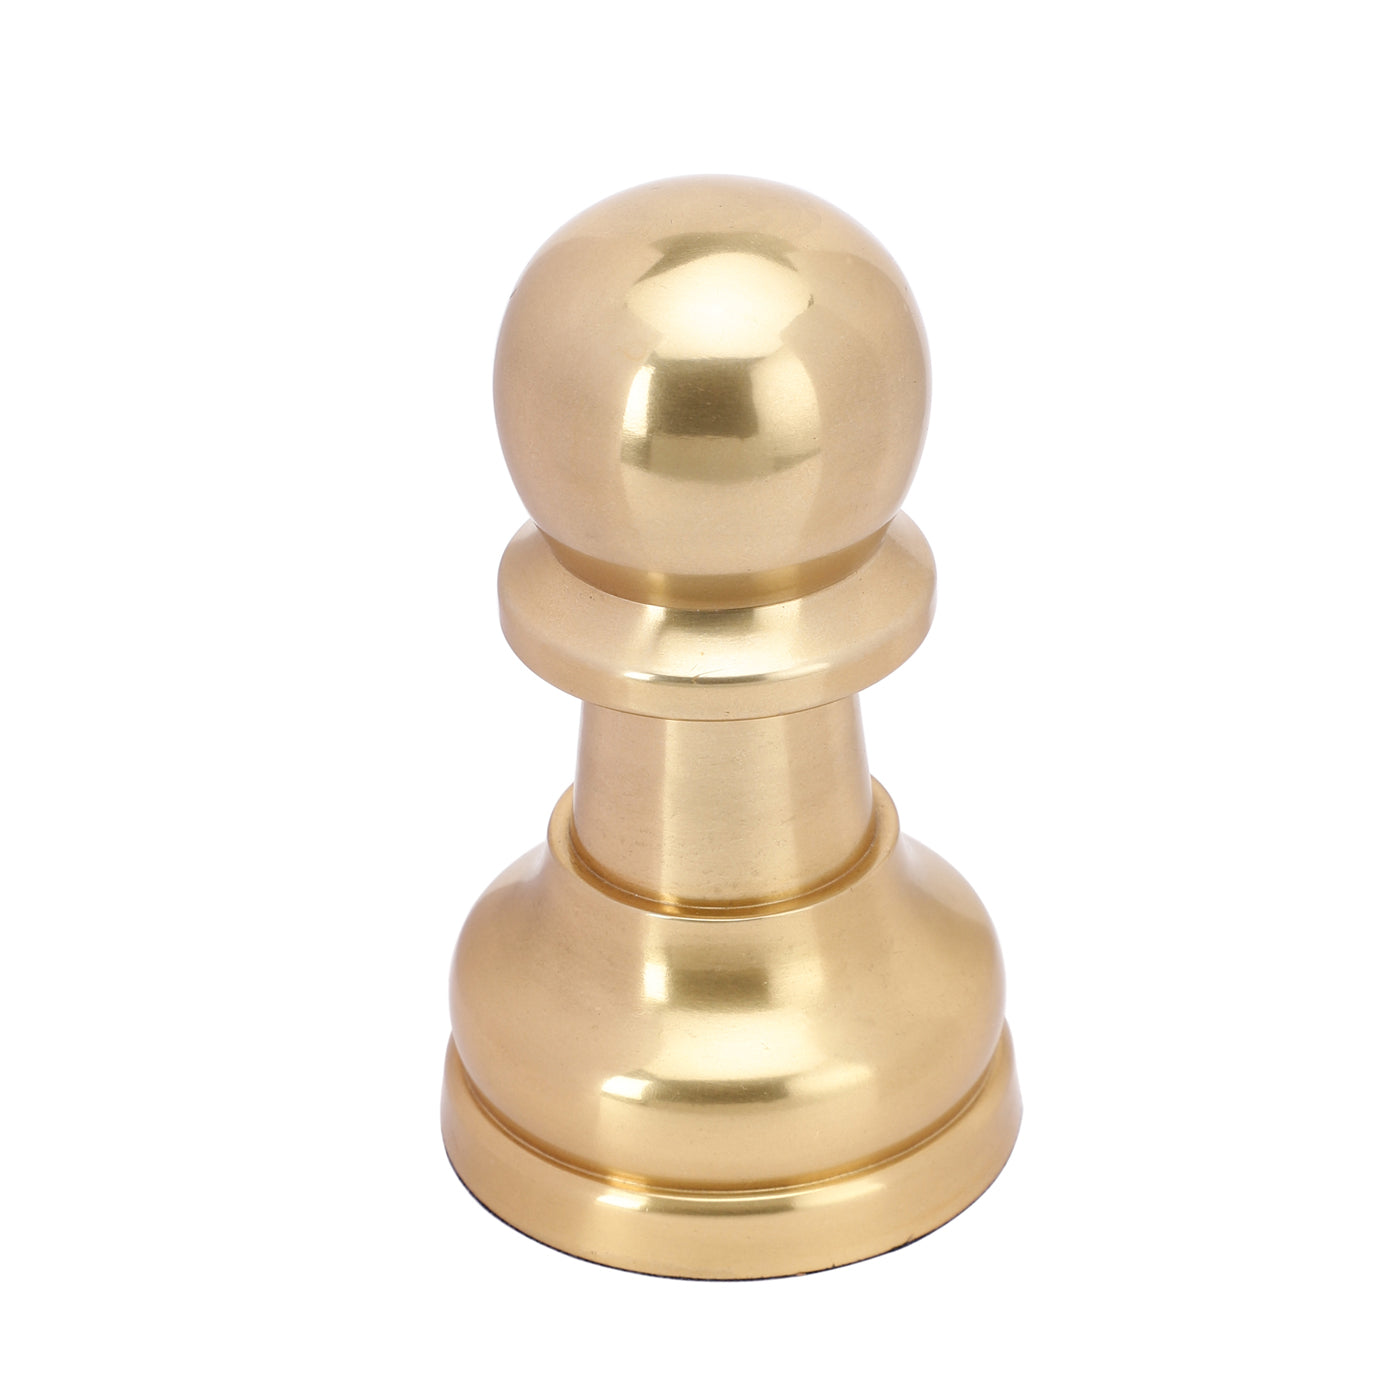 Chess Pawn Gold Over-Size